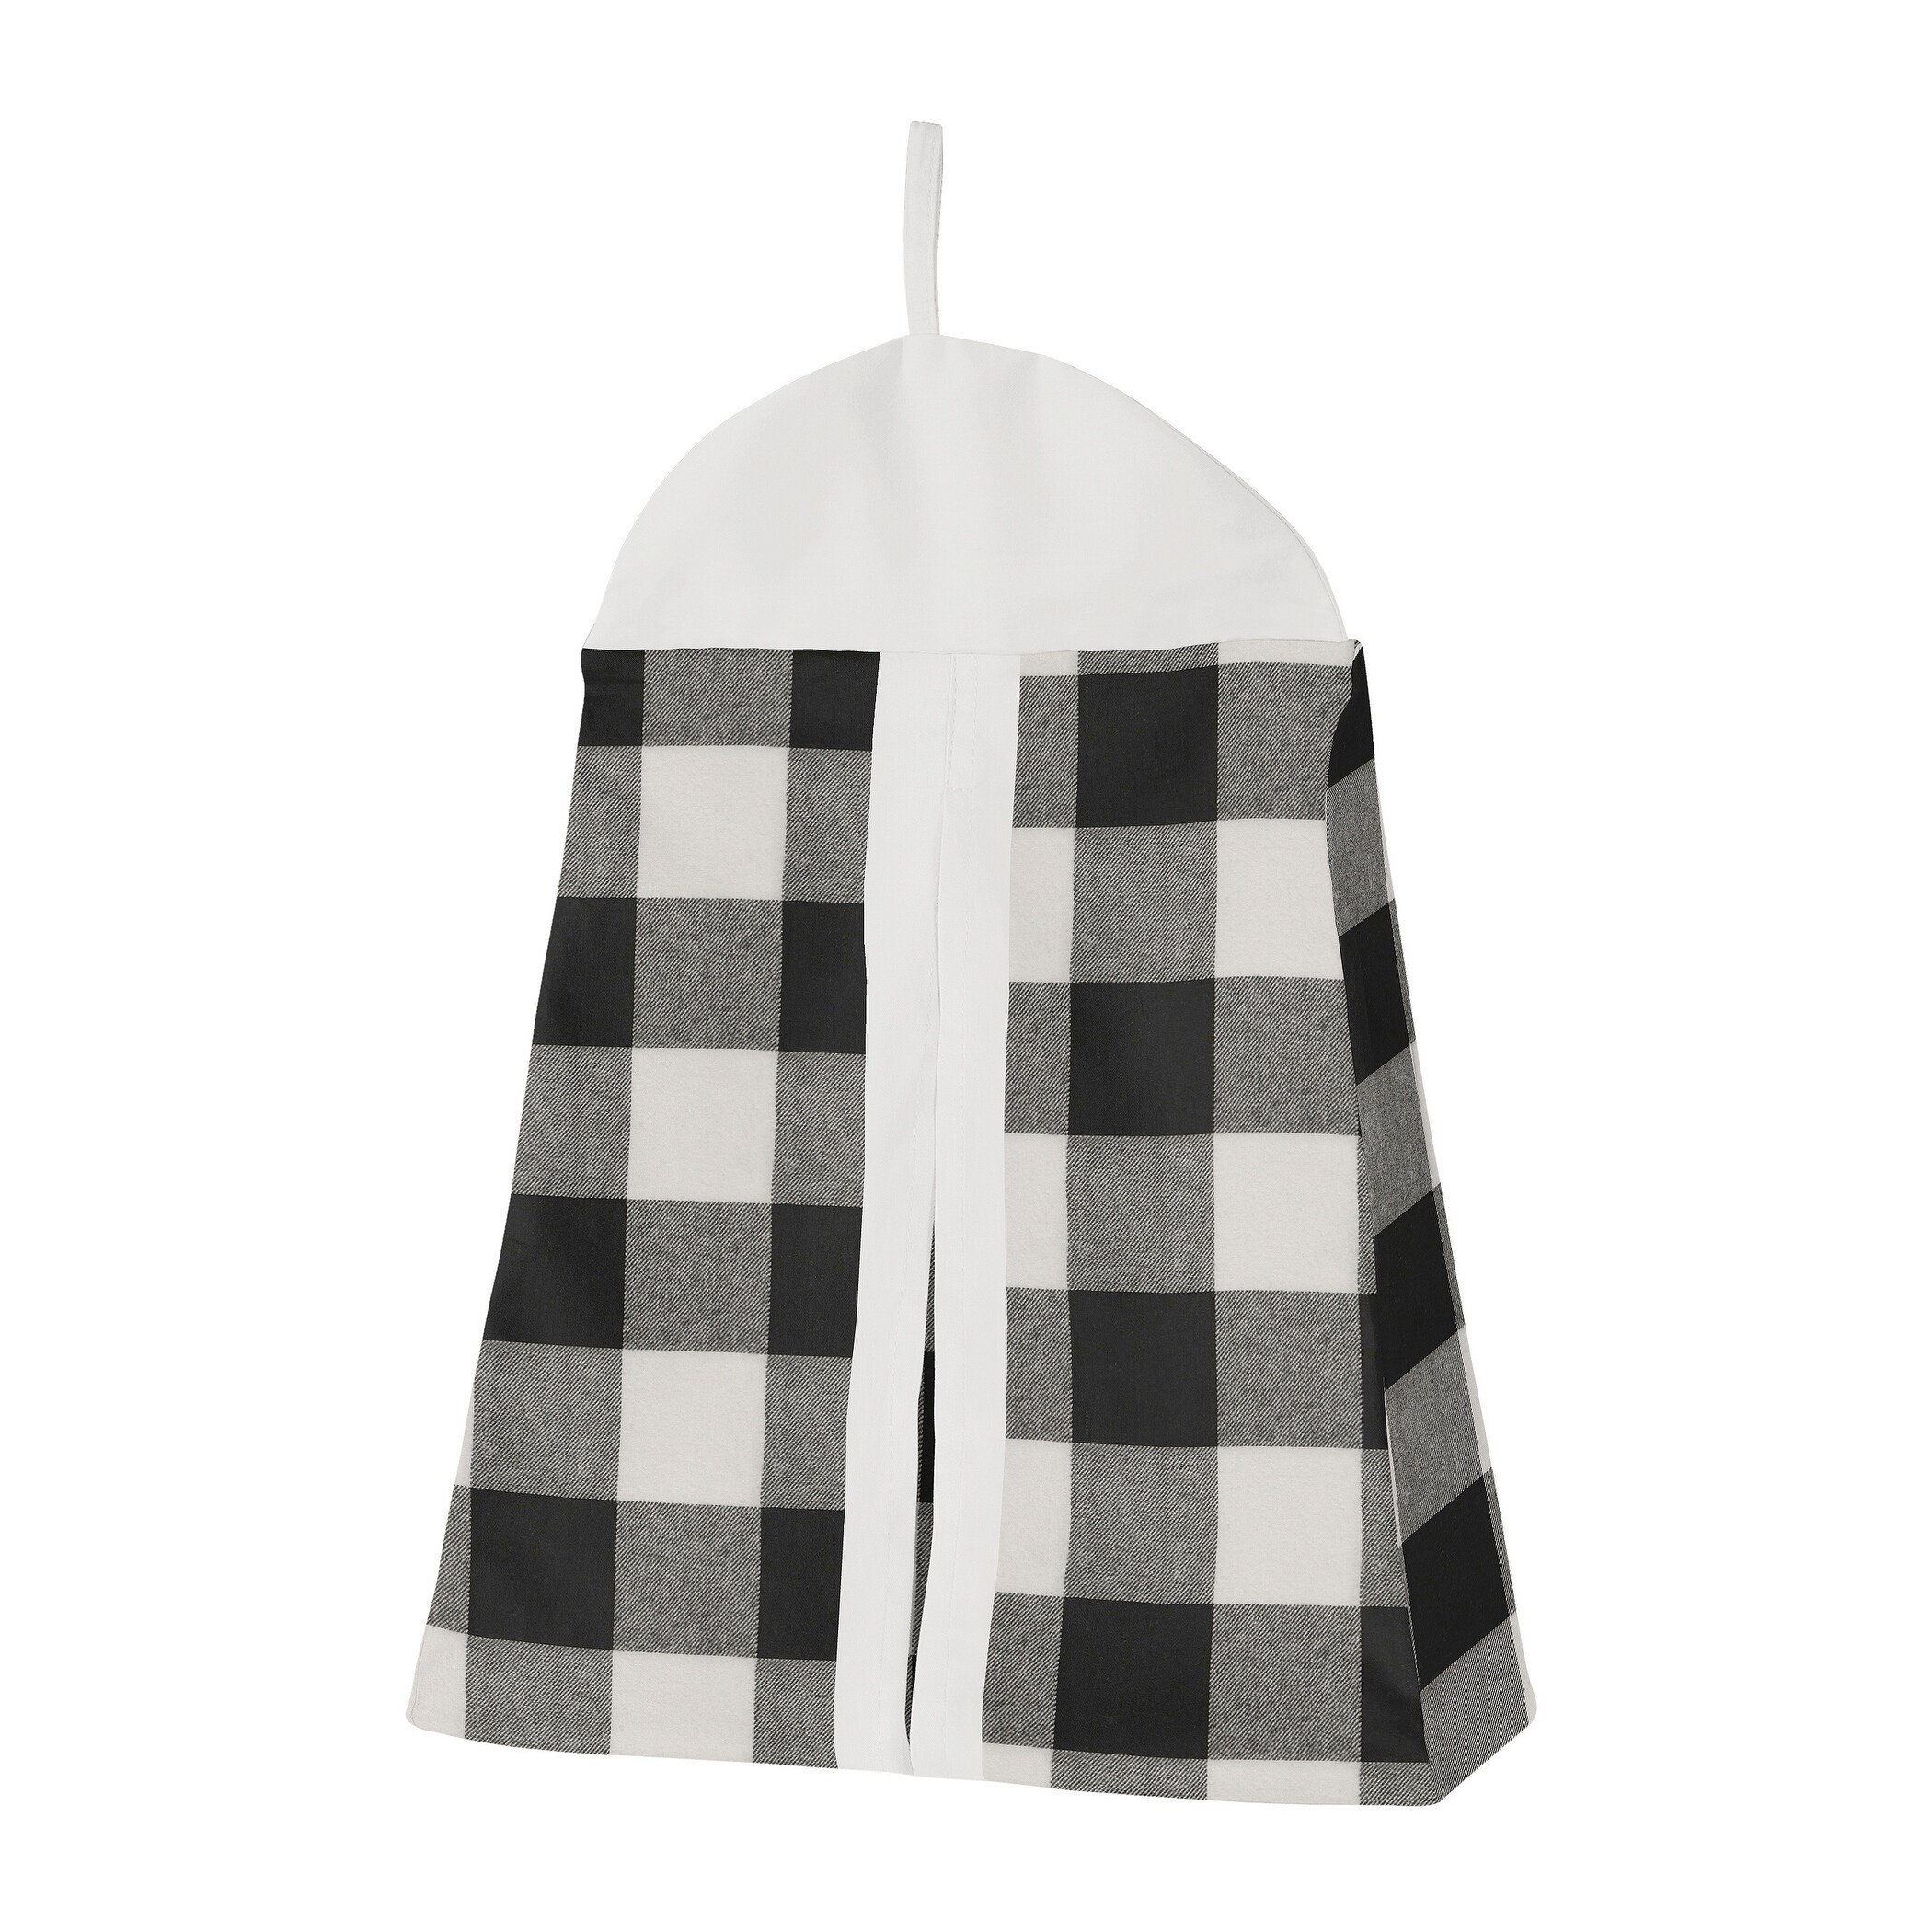 https://ak1.ostkcdn.com/images/products/28625721/Sweet-Jojo-Designs-Black-White-Rustic-Woodland-Flannel-Buffalo-Plaid-Check-Collection-Boy-Girl-4-piece-Nursery-Crib-Bedding-Set-1f9ce5cb-2d4e-443e-88ab-f89ecd63c6e6.jpg